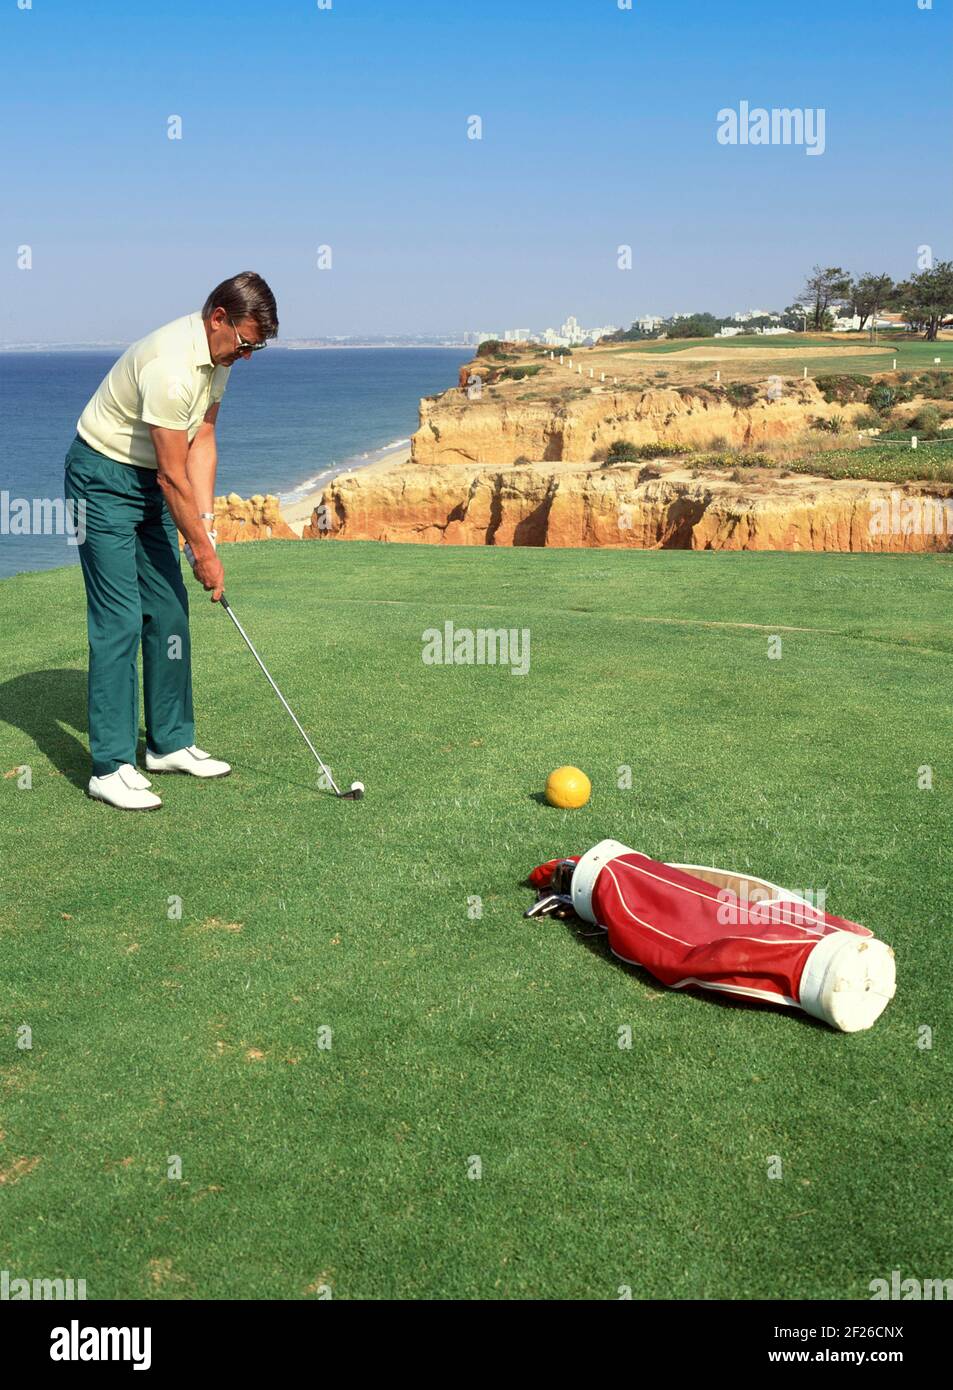 Historical 1992 sport archive view of professional golfer player on the green at Vale do Lobo golf course in the 90s the famous cliff top hole beside ravines & Algarve beaches model released man playing golf the way we were in an archival travel image in Portugal in the 1990s Stock Photo